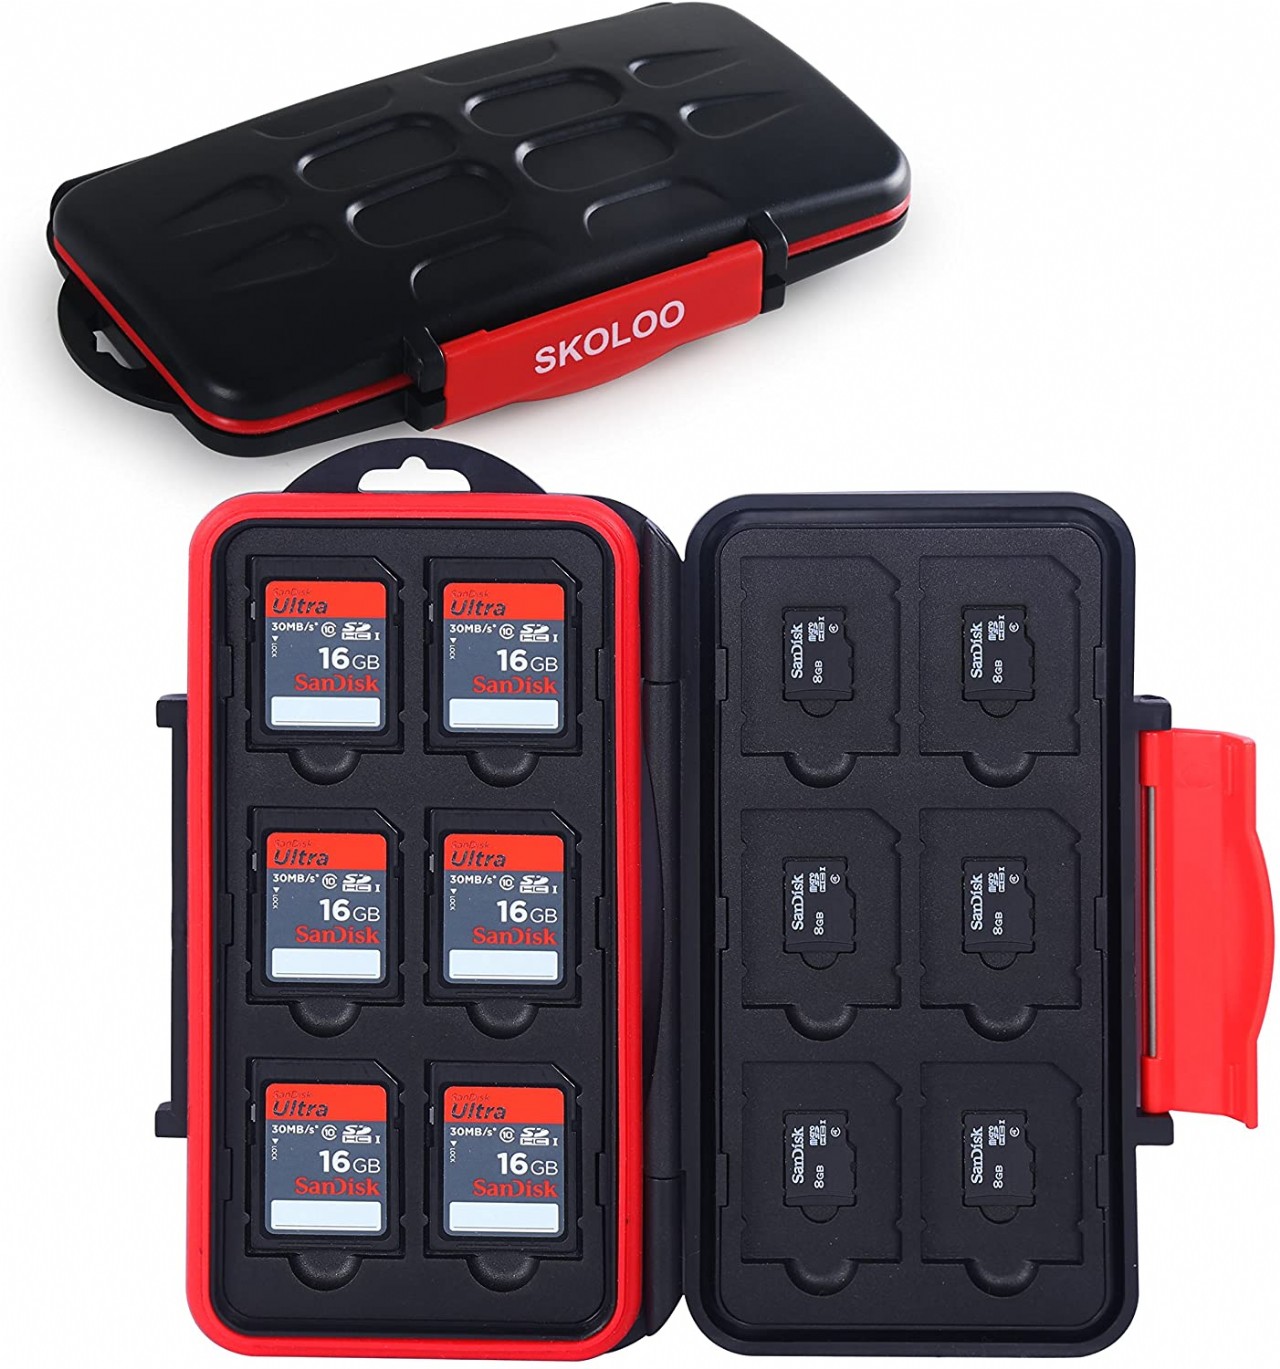 Skoloo SD Card Case, Waterproof Memory Card Holder, 12 SD Card Cases Storage + 12 Micro SD Card Hold